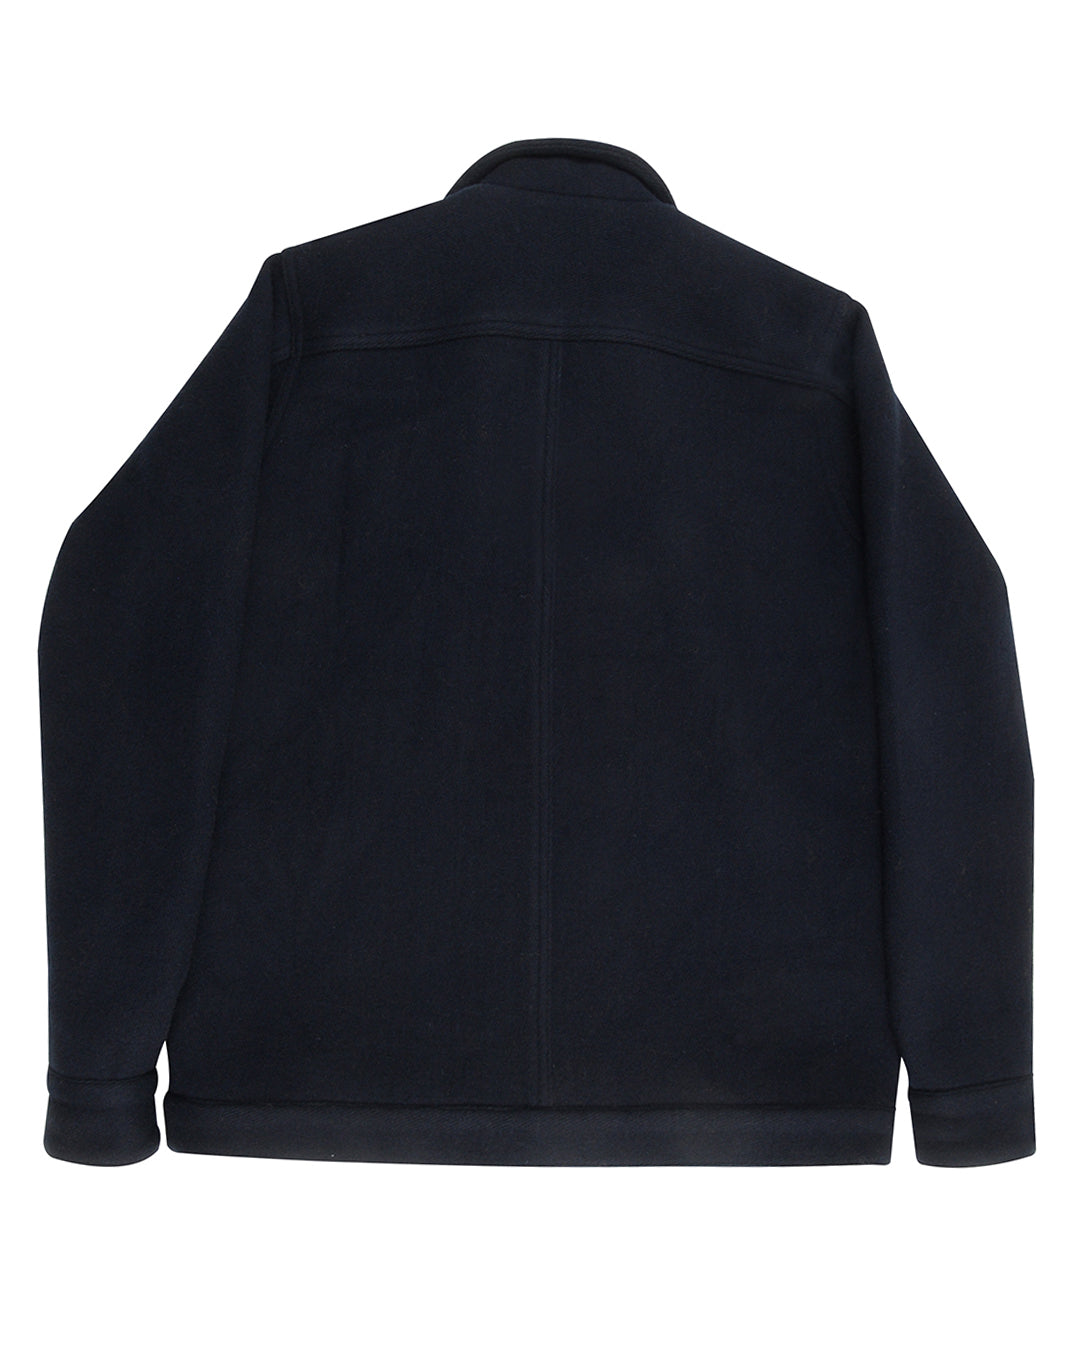 Luxire Wool Navy Shirt Jacket